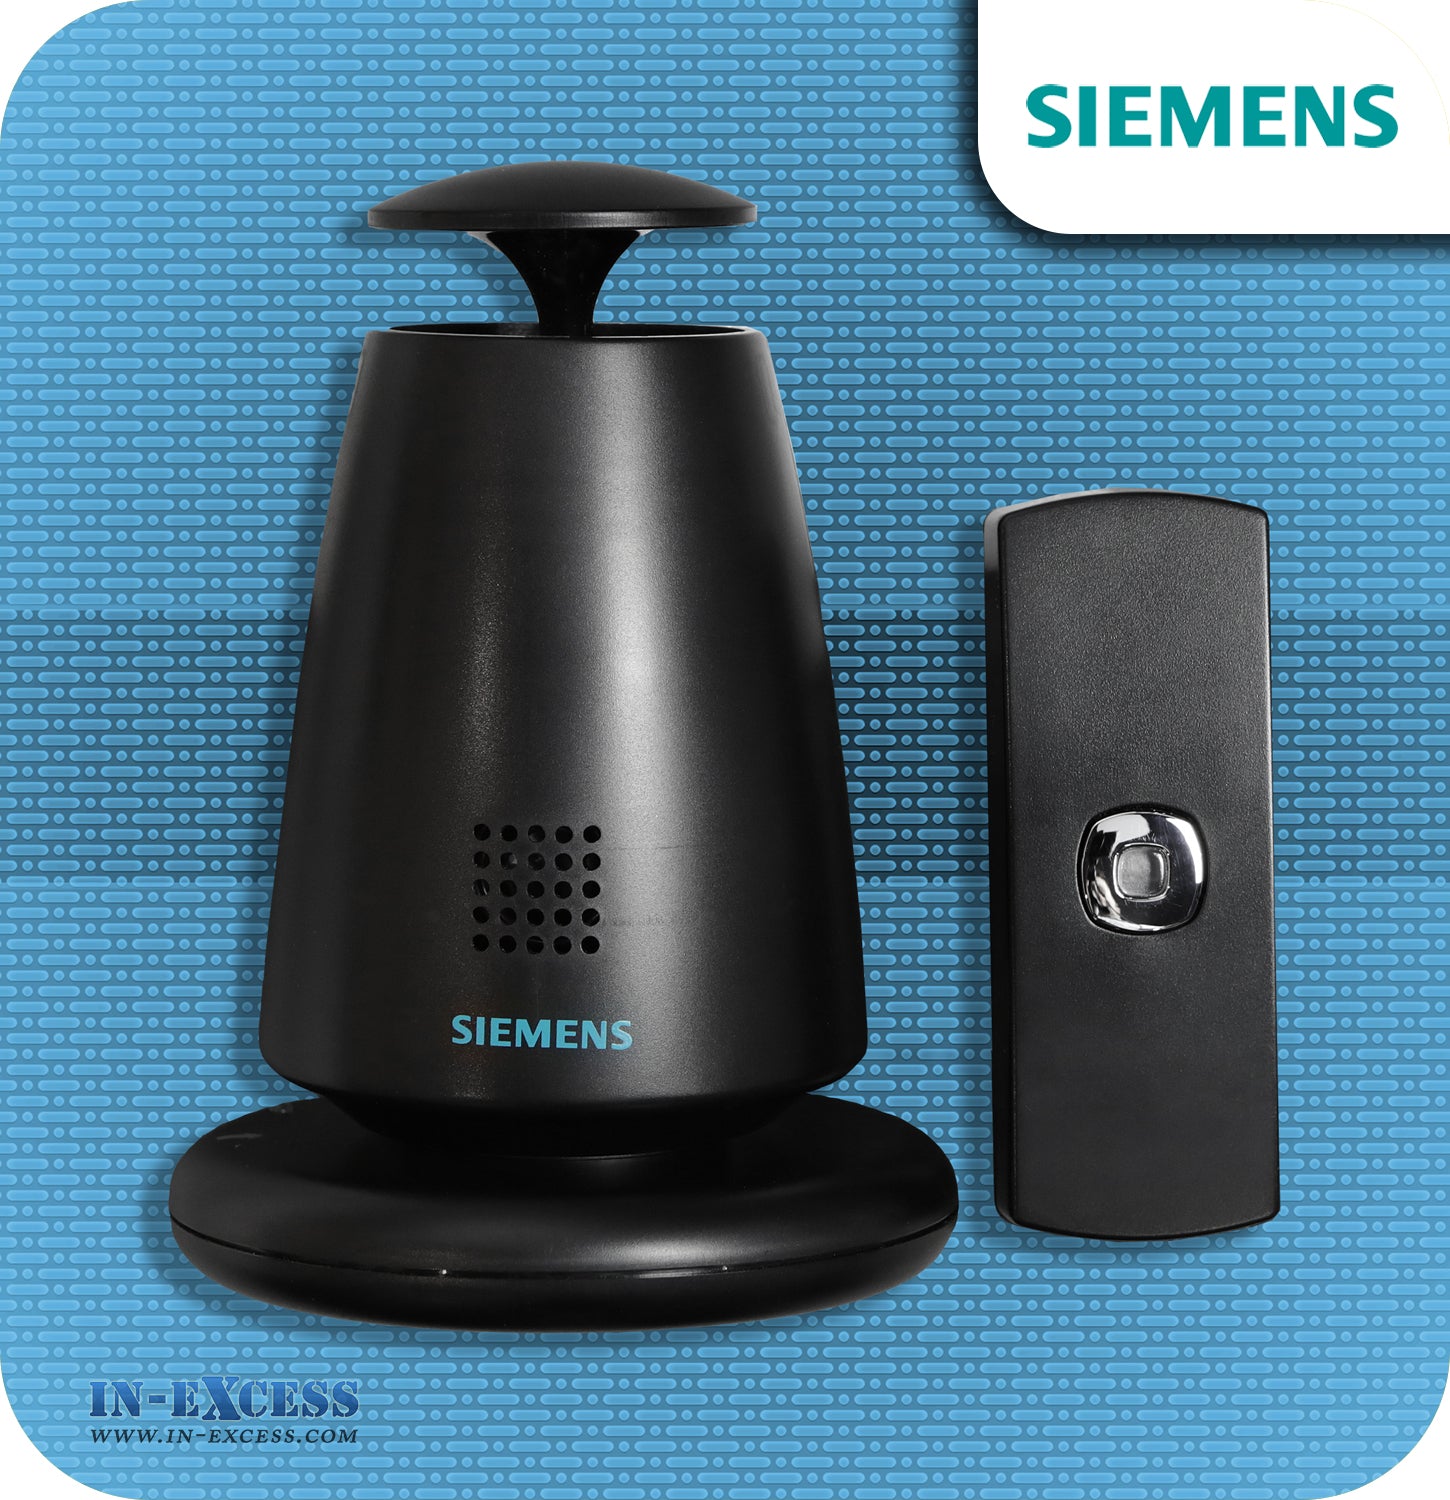 Siemens Revive Wirefree Portable Door Bell Chime Kit JSJS-209 - With JSJS-104B Bell Push